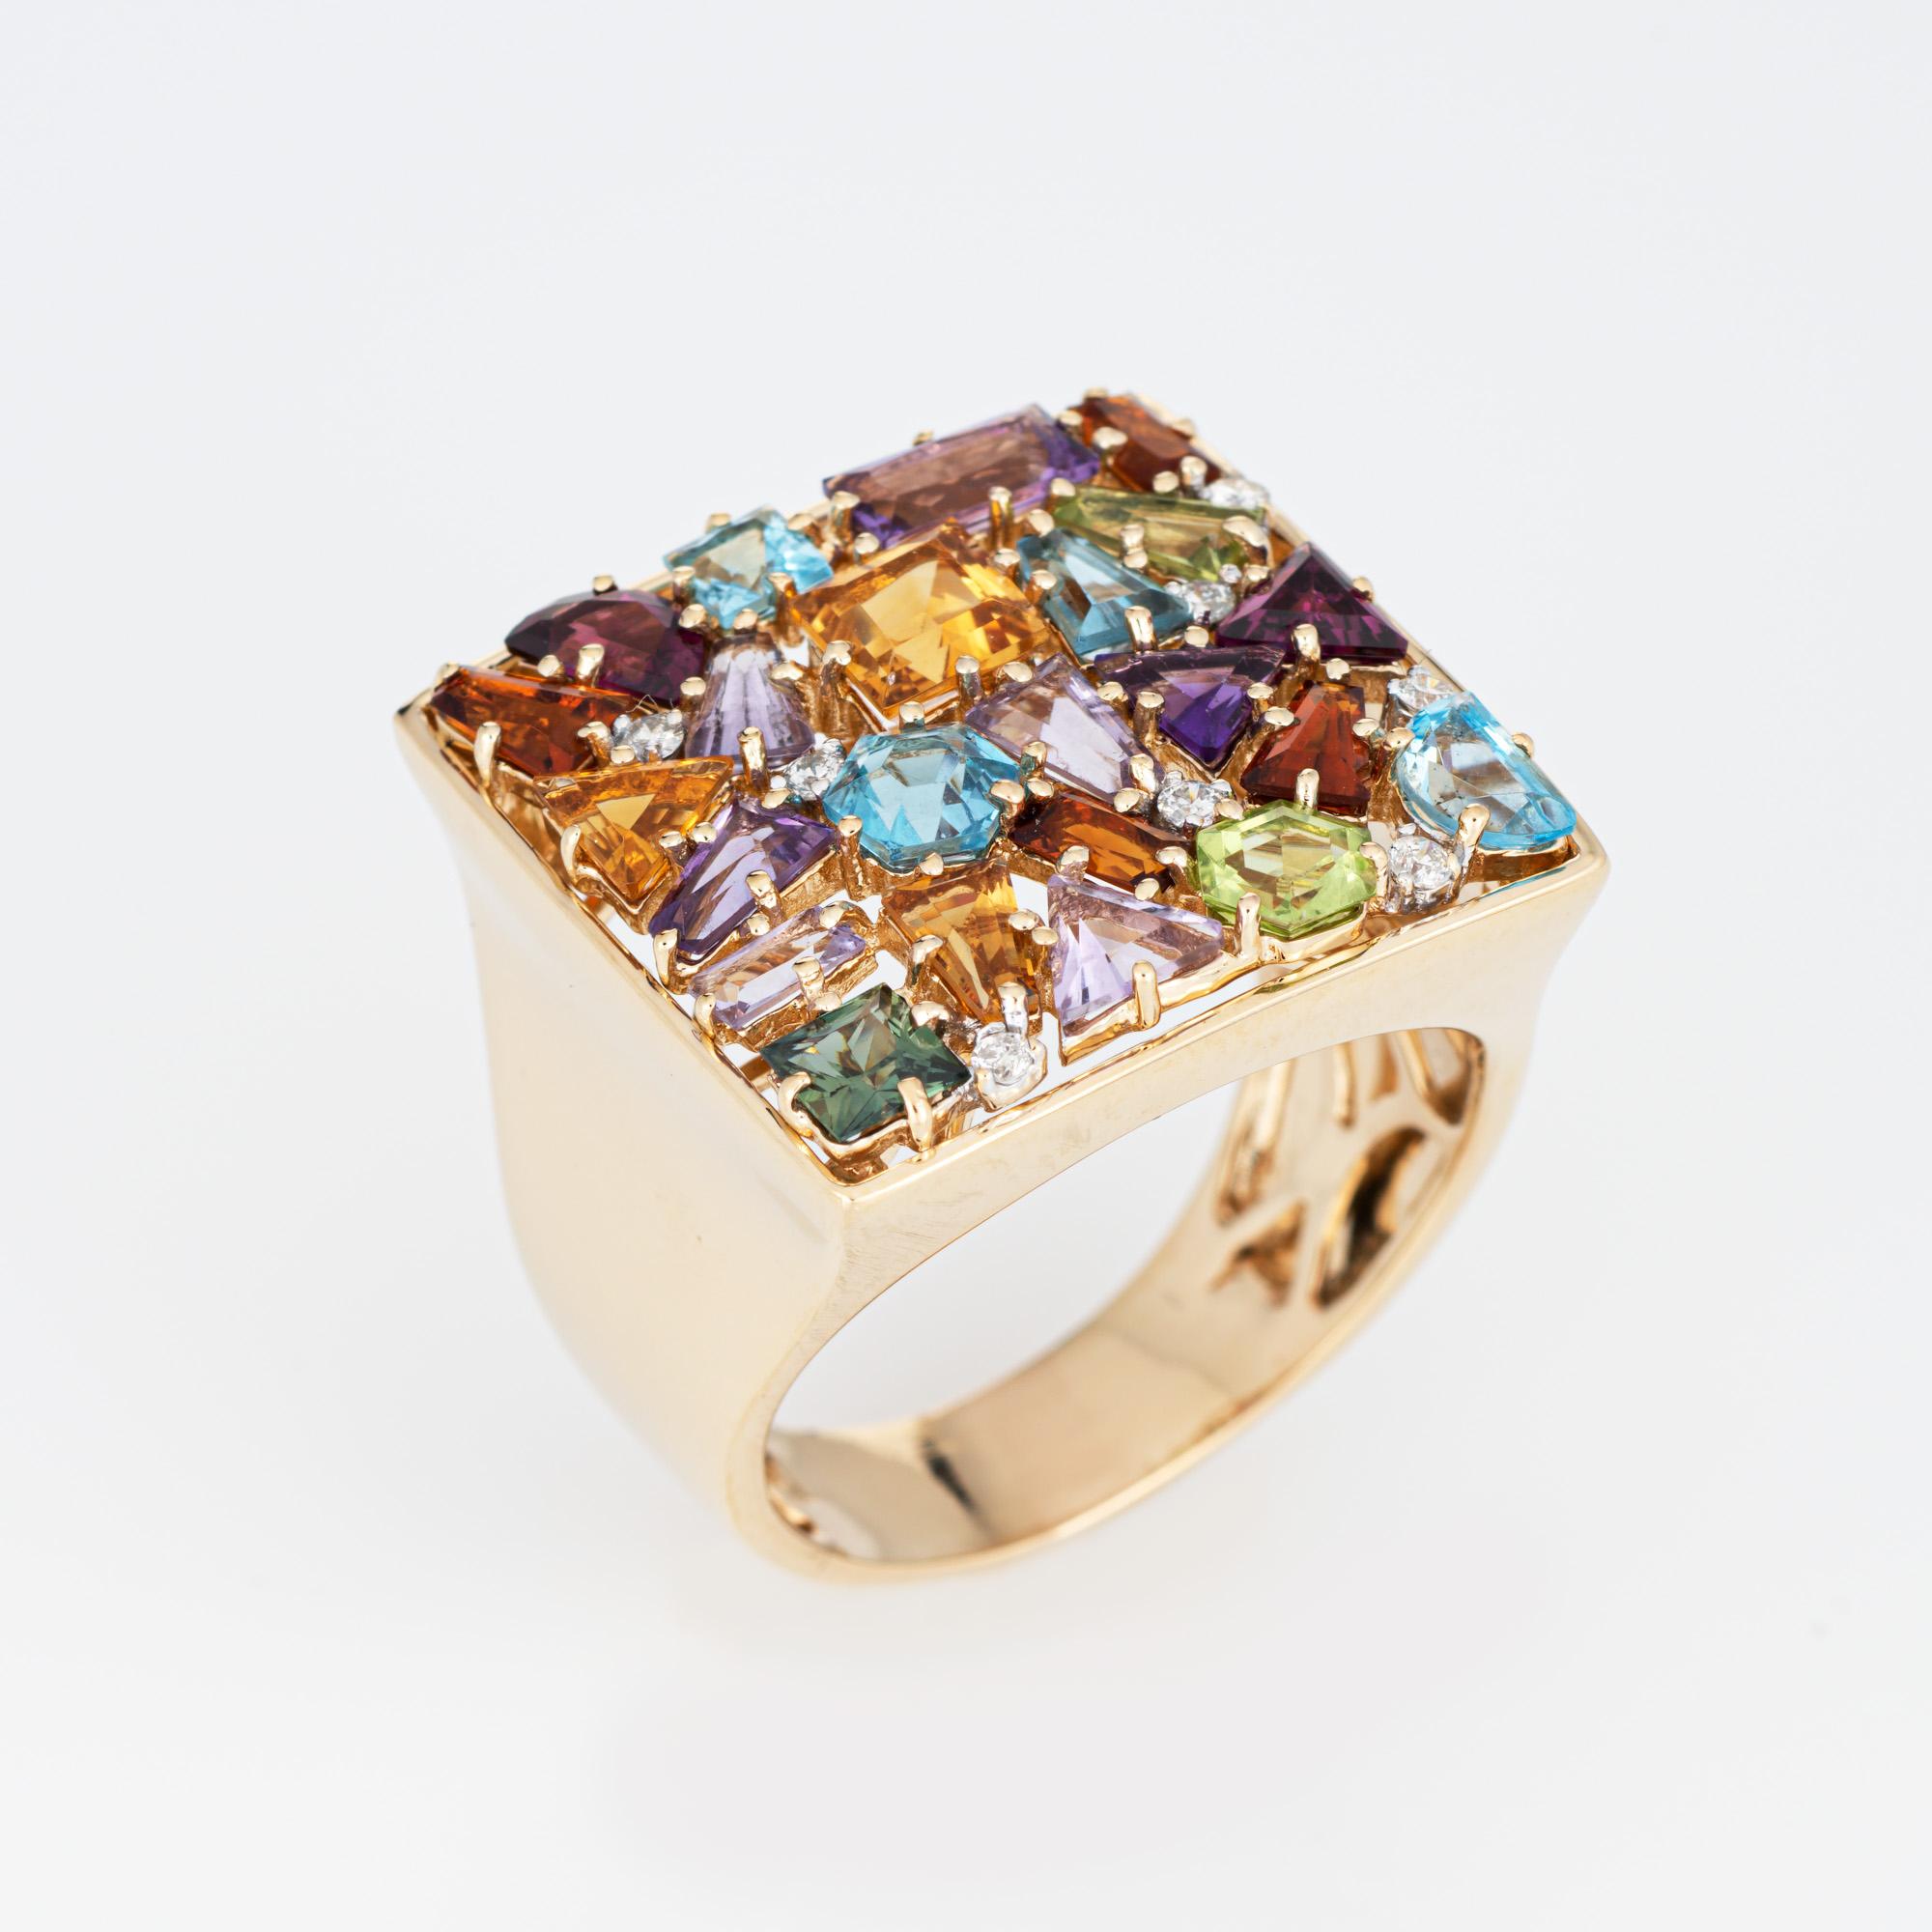 Stylish rainbow mosaic ring crafted in 14 karat yellow gold. 

Citrine, amethyst, peridot, and blue topaz in various shapes are set into the mount. 8 diamonds total an estimated 0.04 carats (estimated at H-I color and VS2-SI2 clarity). The stones